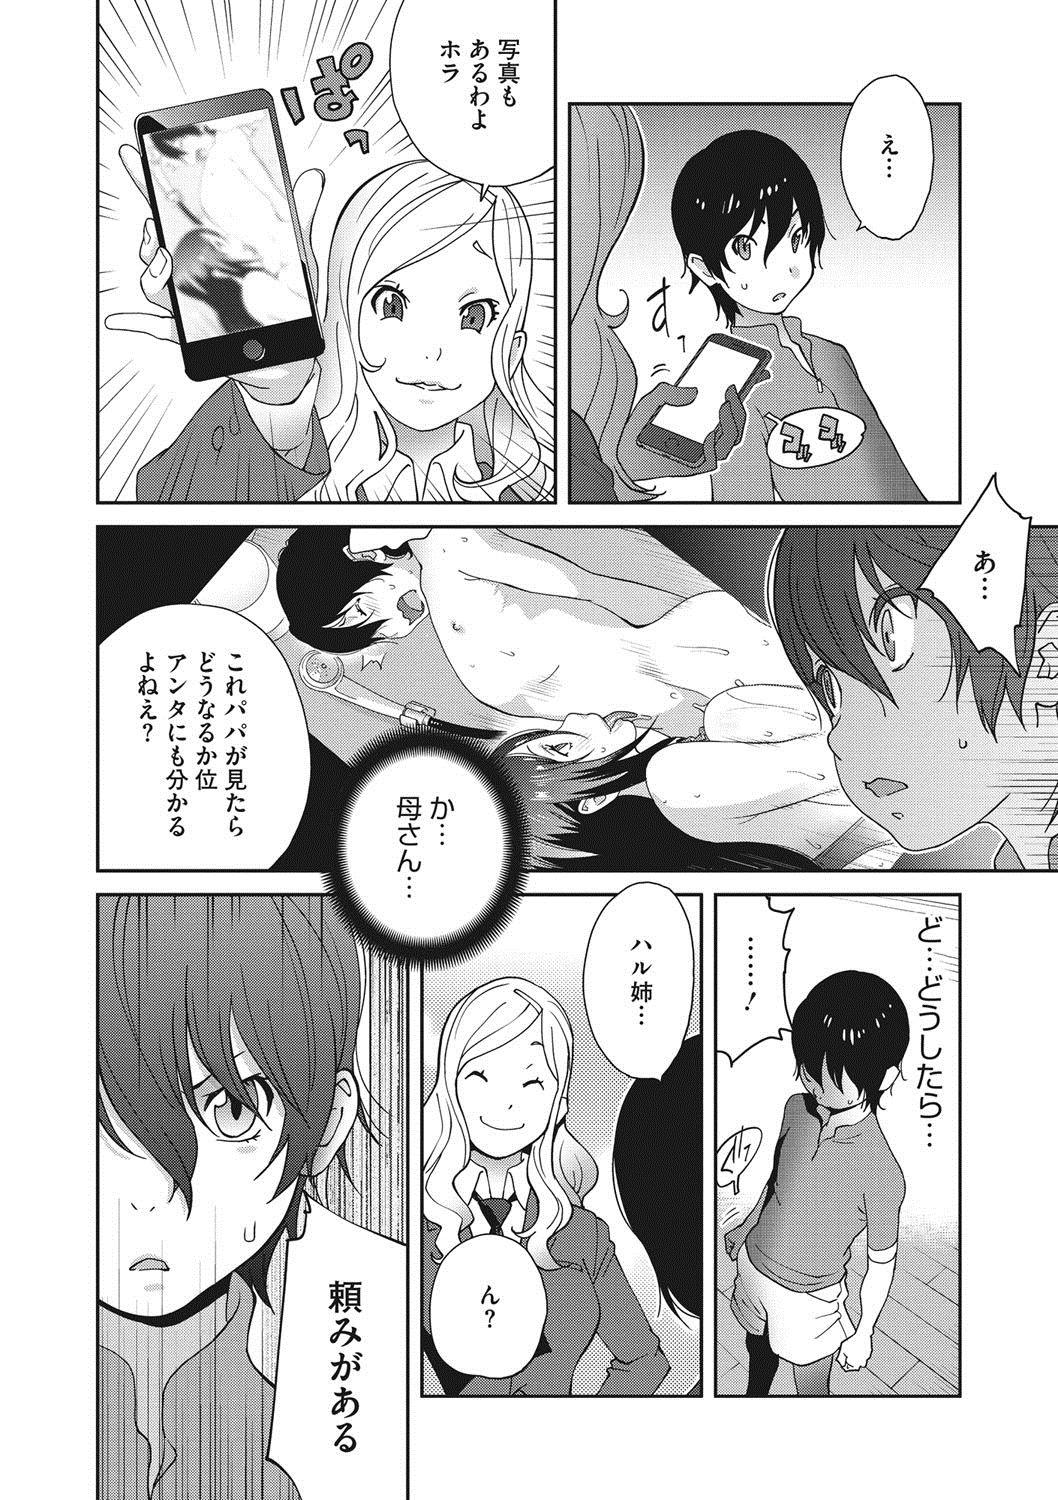 [Kotoyoshi Yumisuke] Haha to Ane to Aoi Ichigo no Fromage - Fromage of mother and an older sister and a blue strawberry Ch. 1-3 43